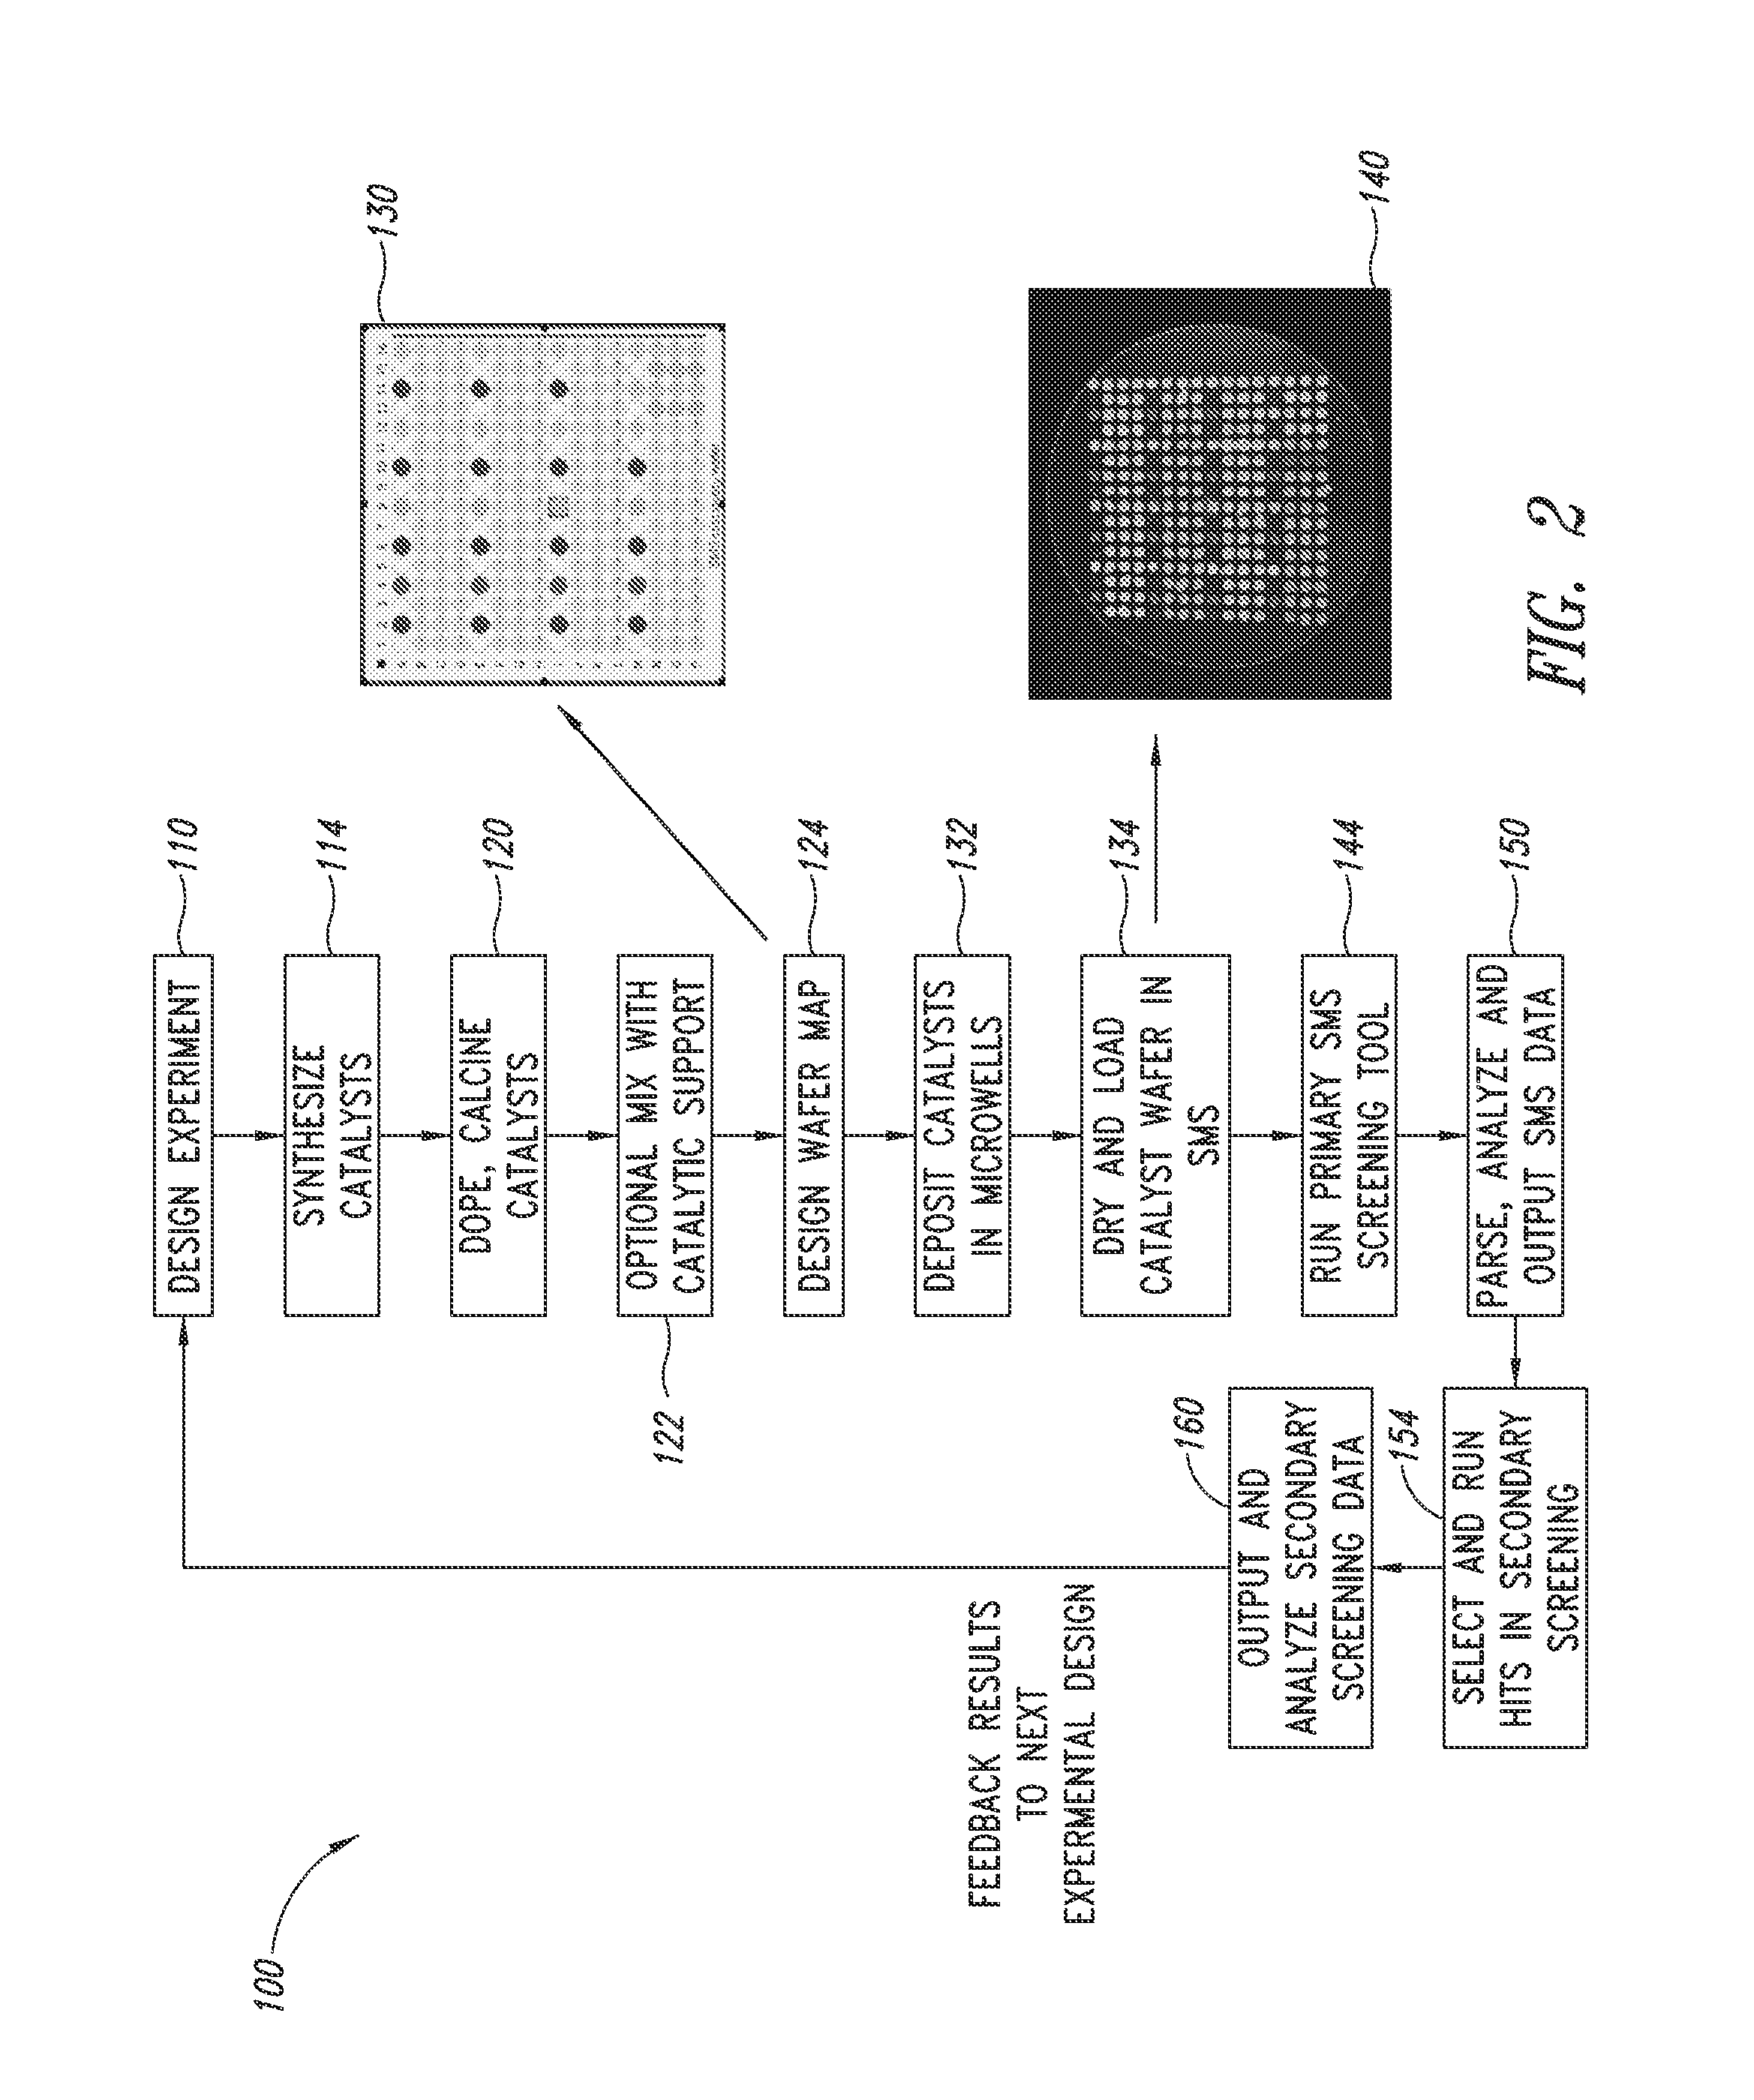 Catalysts for petrochemical catalysis